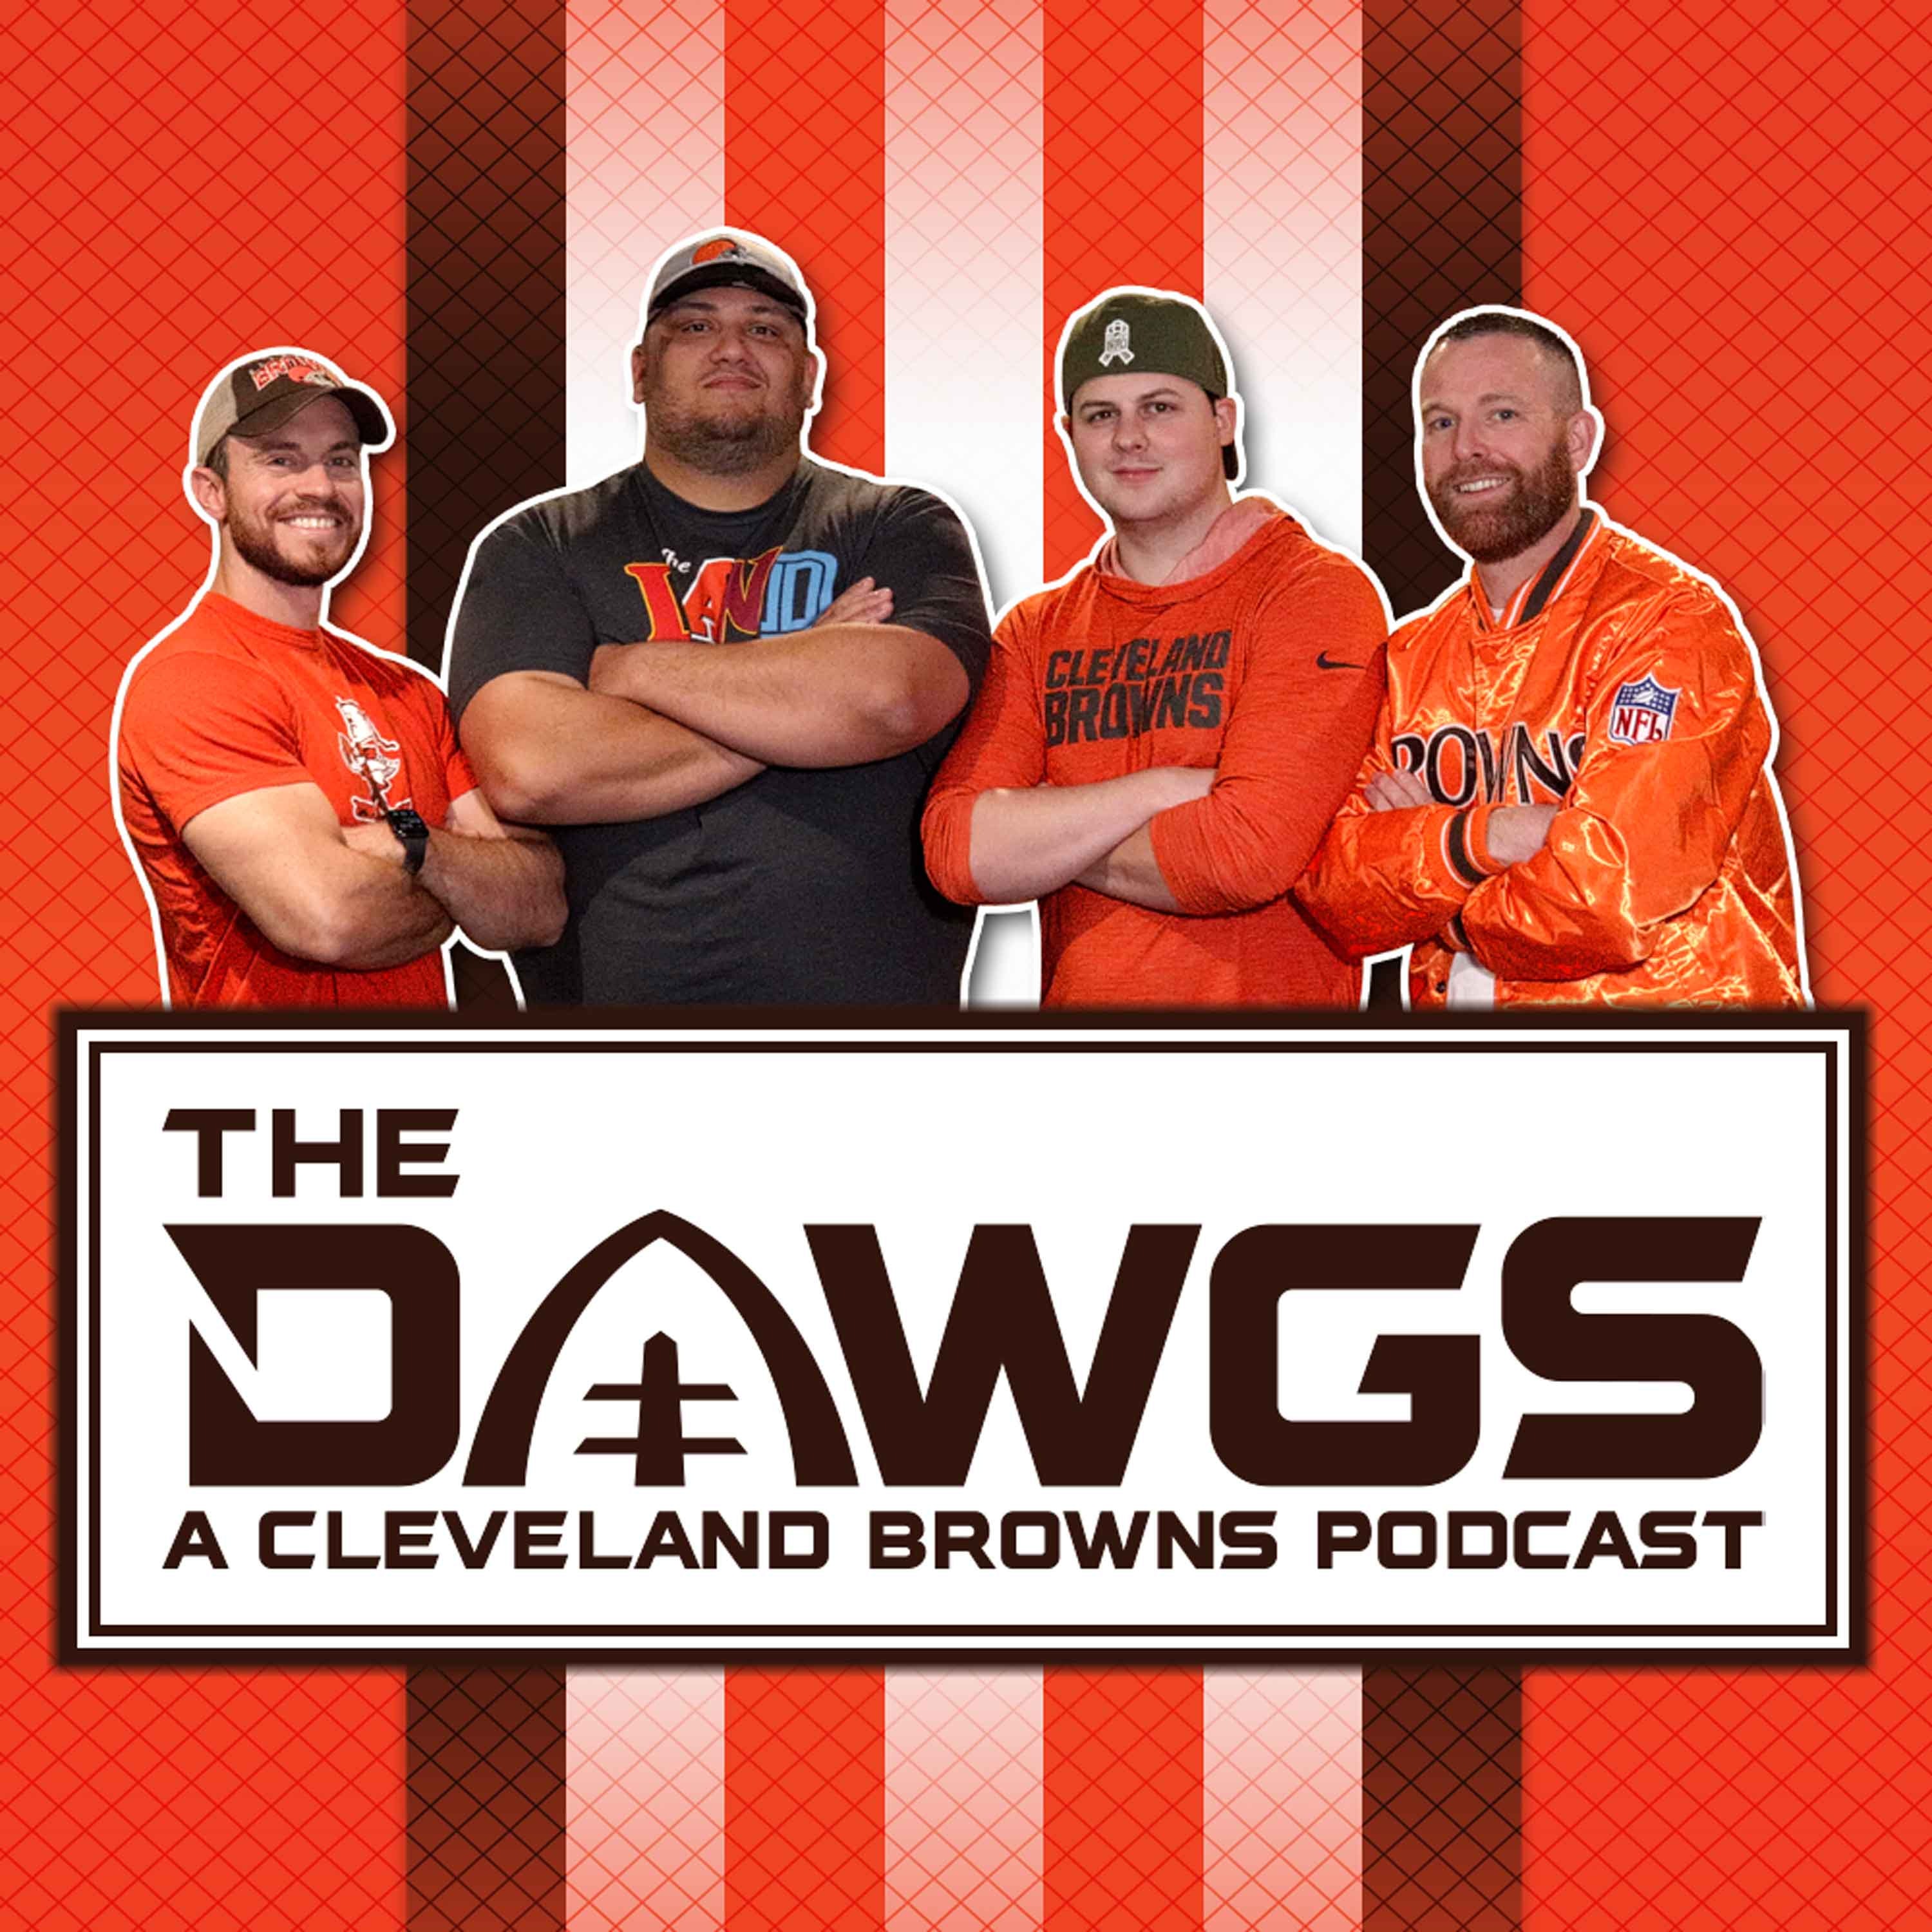 Week 13 LIVE - 1st Quarter- Cleveland Browns at Houston Texans  | The Dawgs - A Cleveland Browns Podcast - December 4, 2022